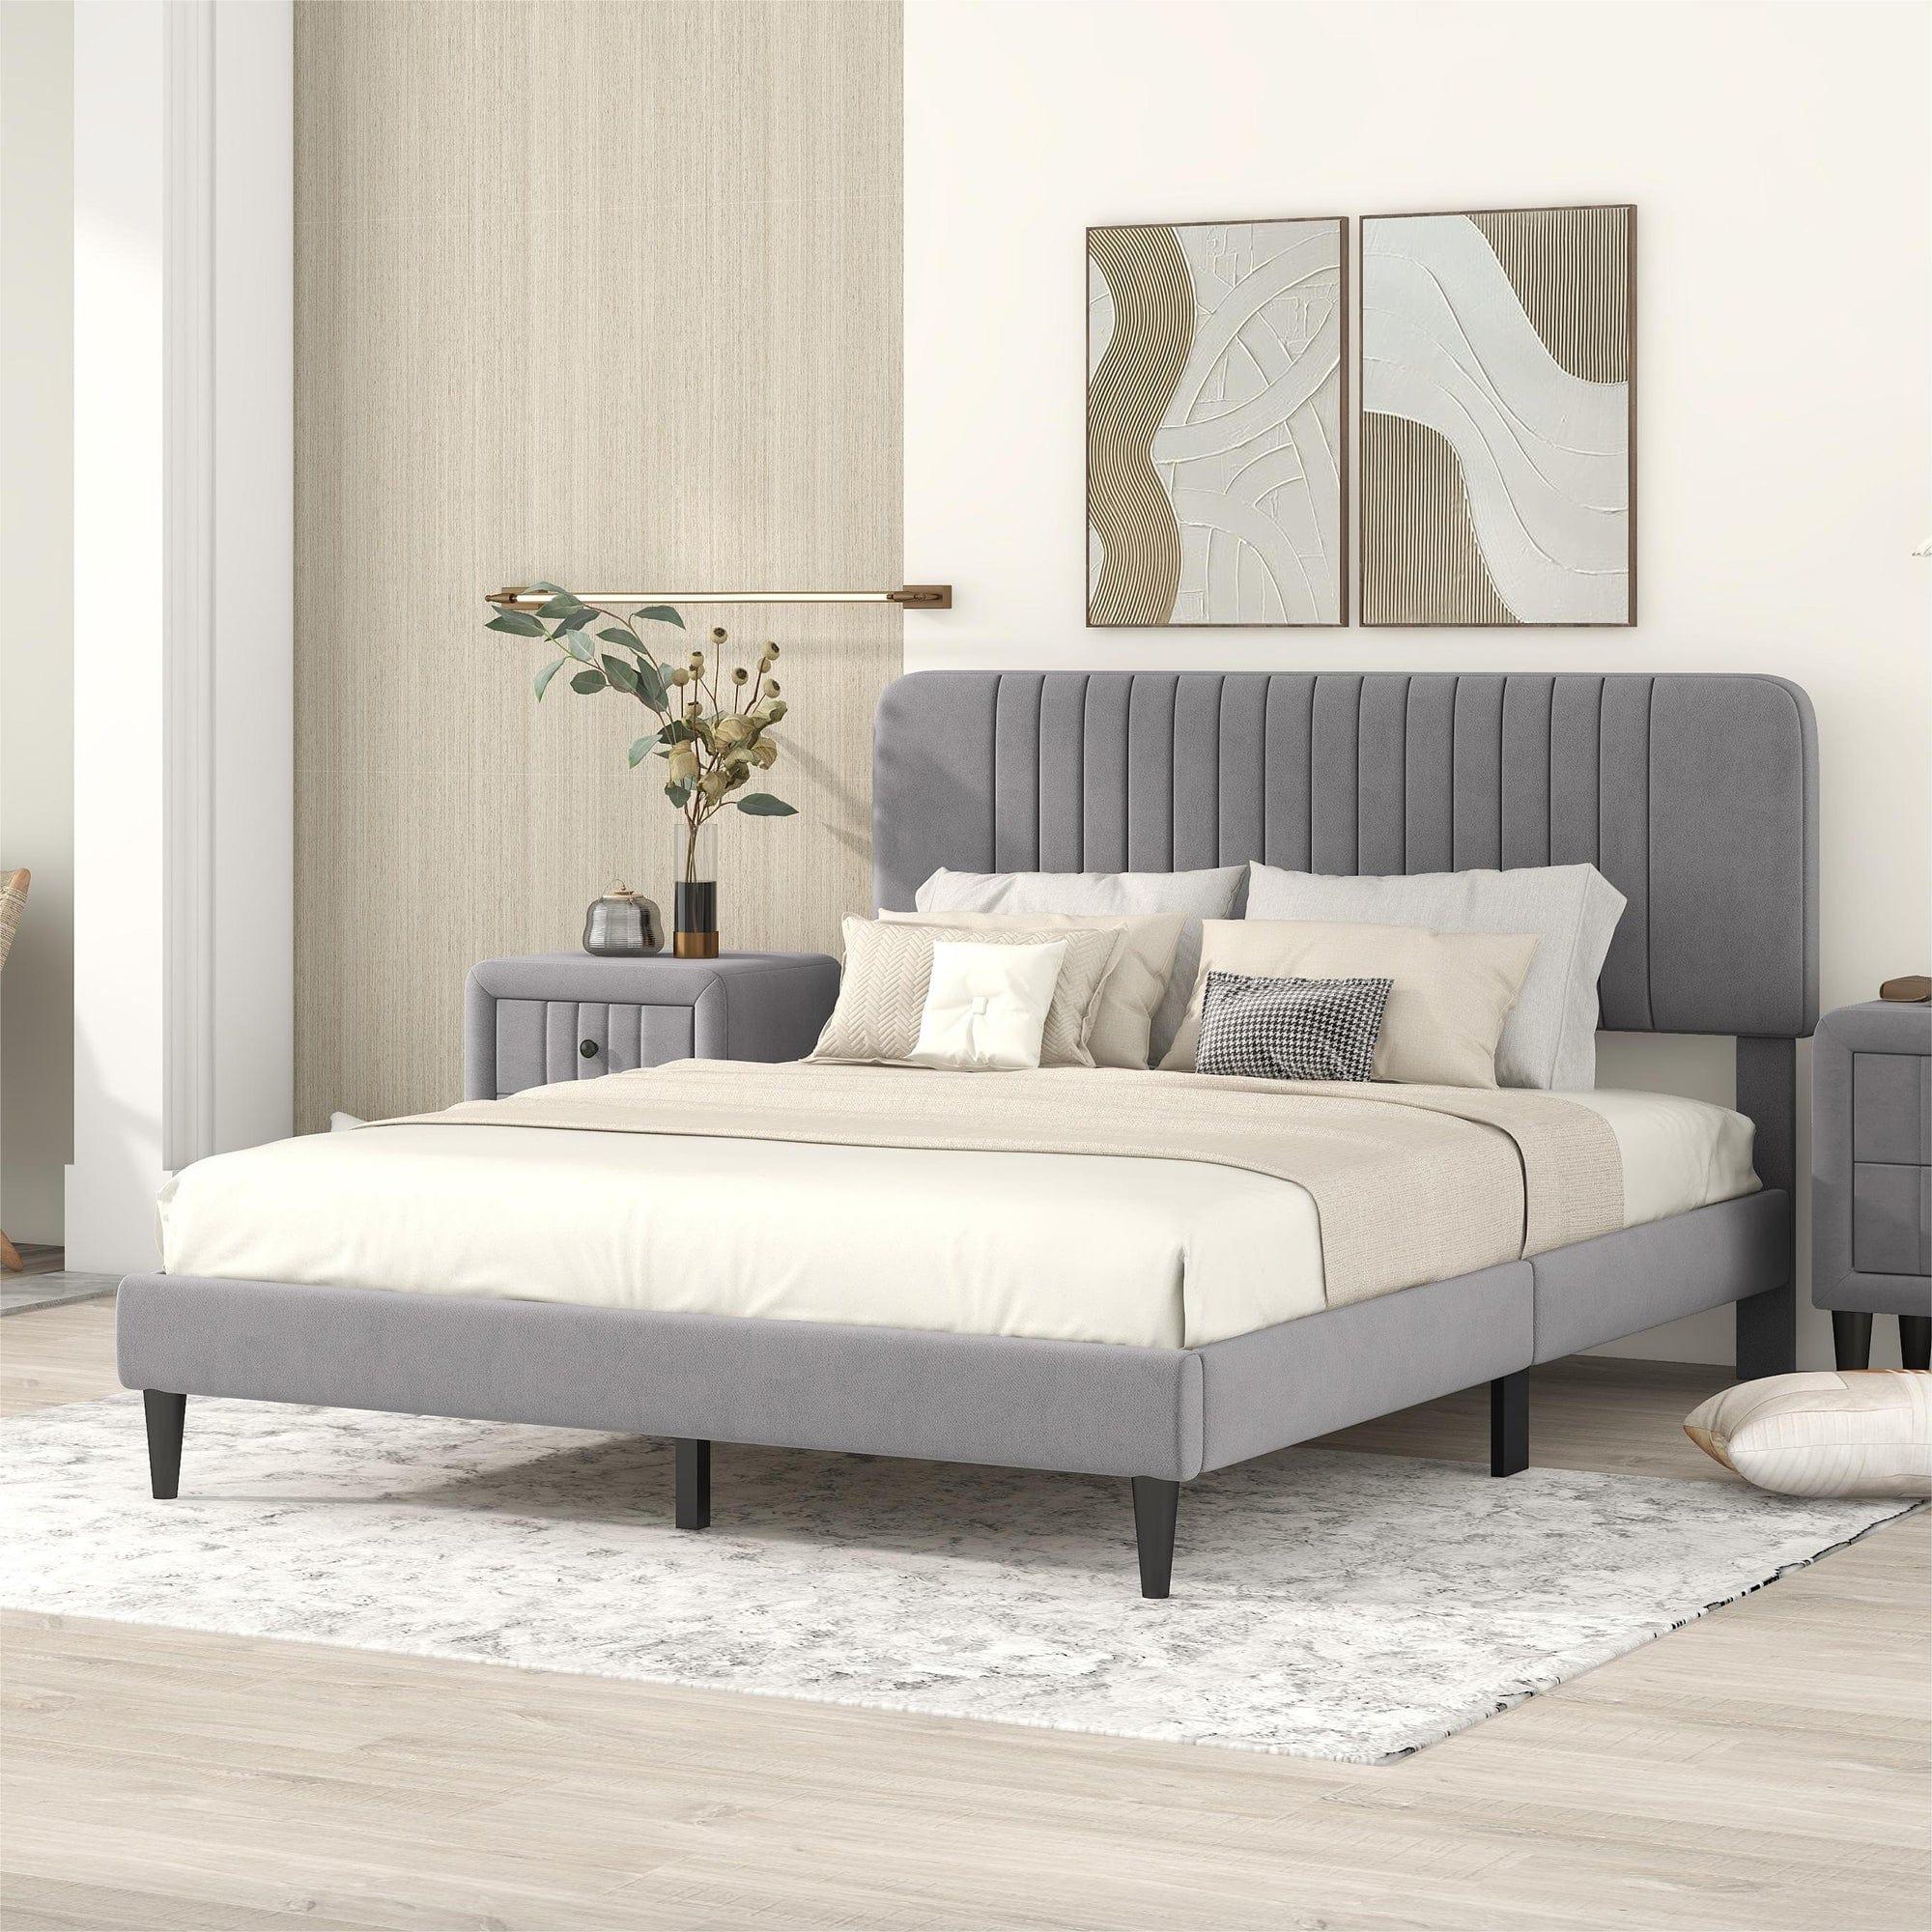 Shop Queen Size Upholstered Platform Bed,No Box Spring Needed, Velvet Fabric,Gray Mademoiselle Home Decor